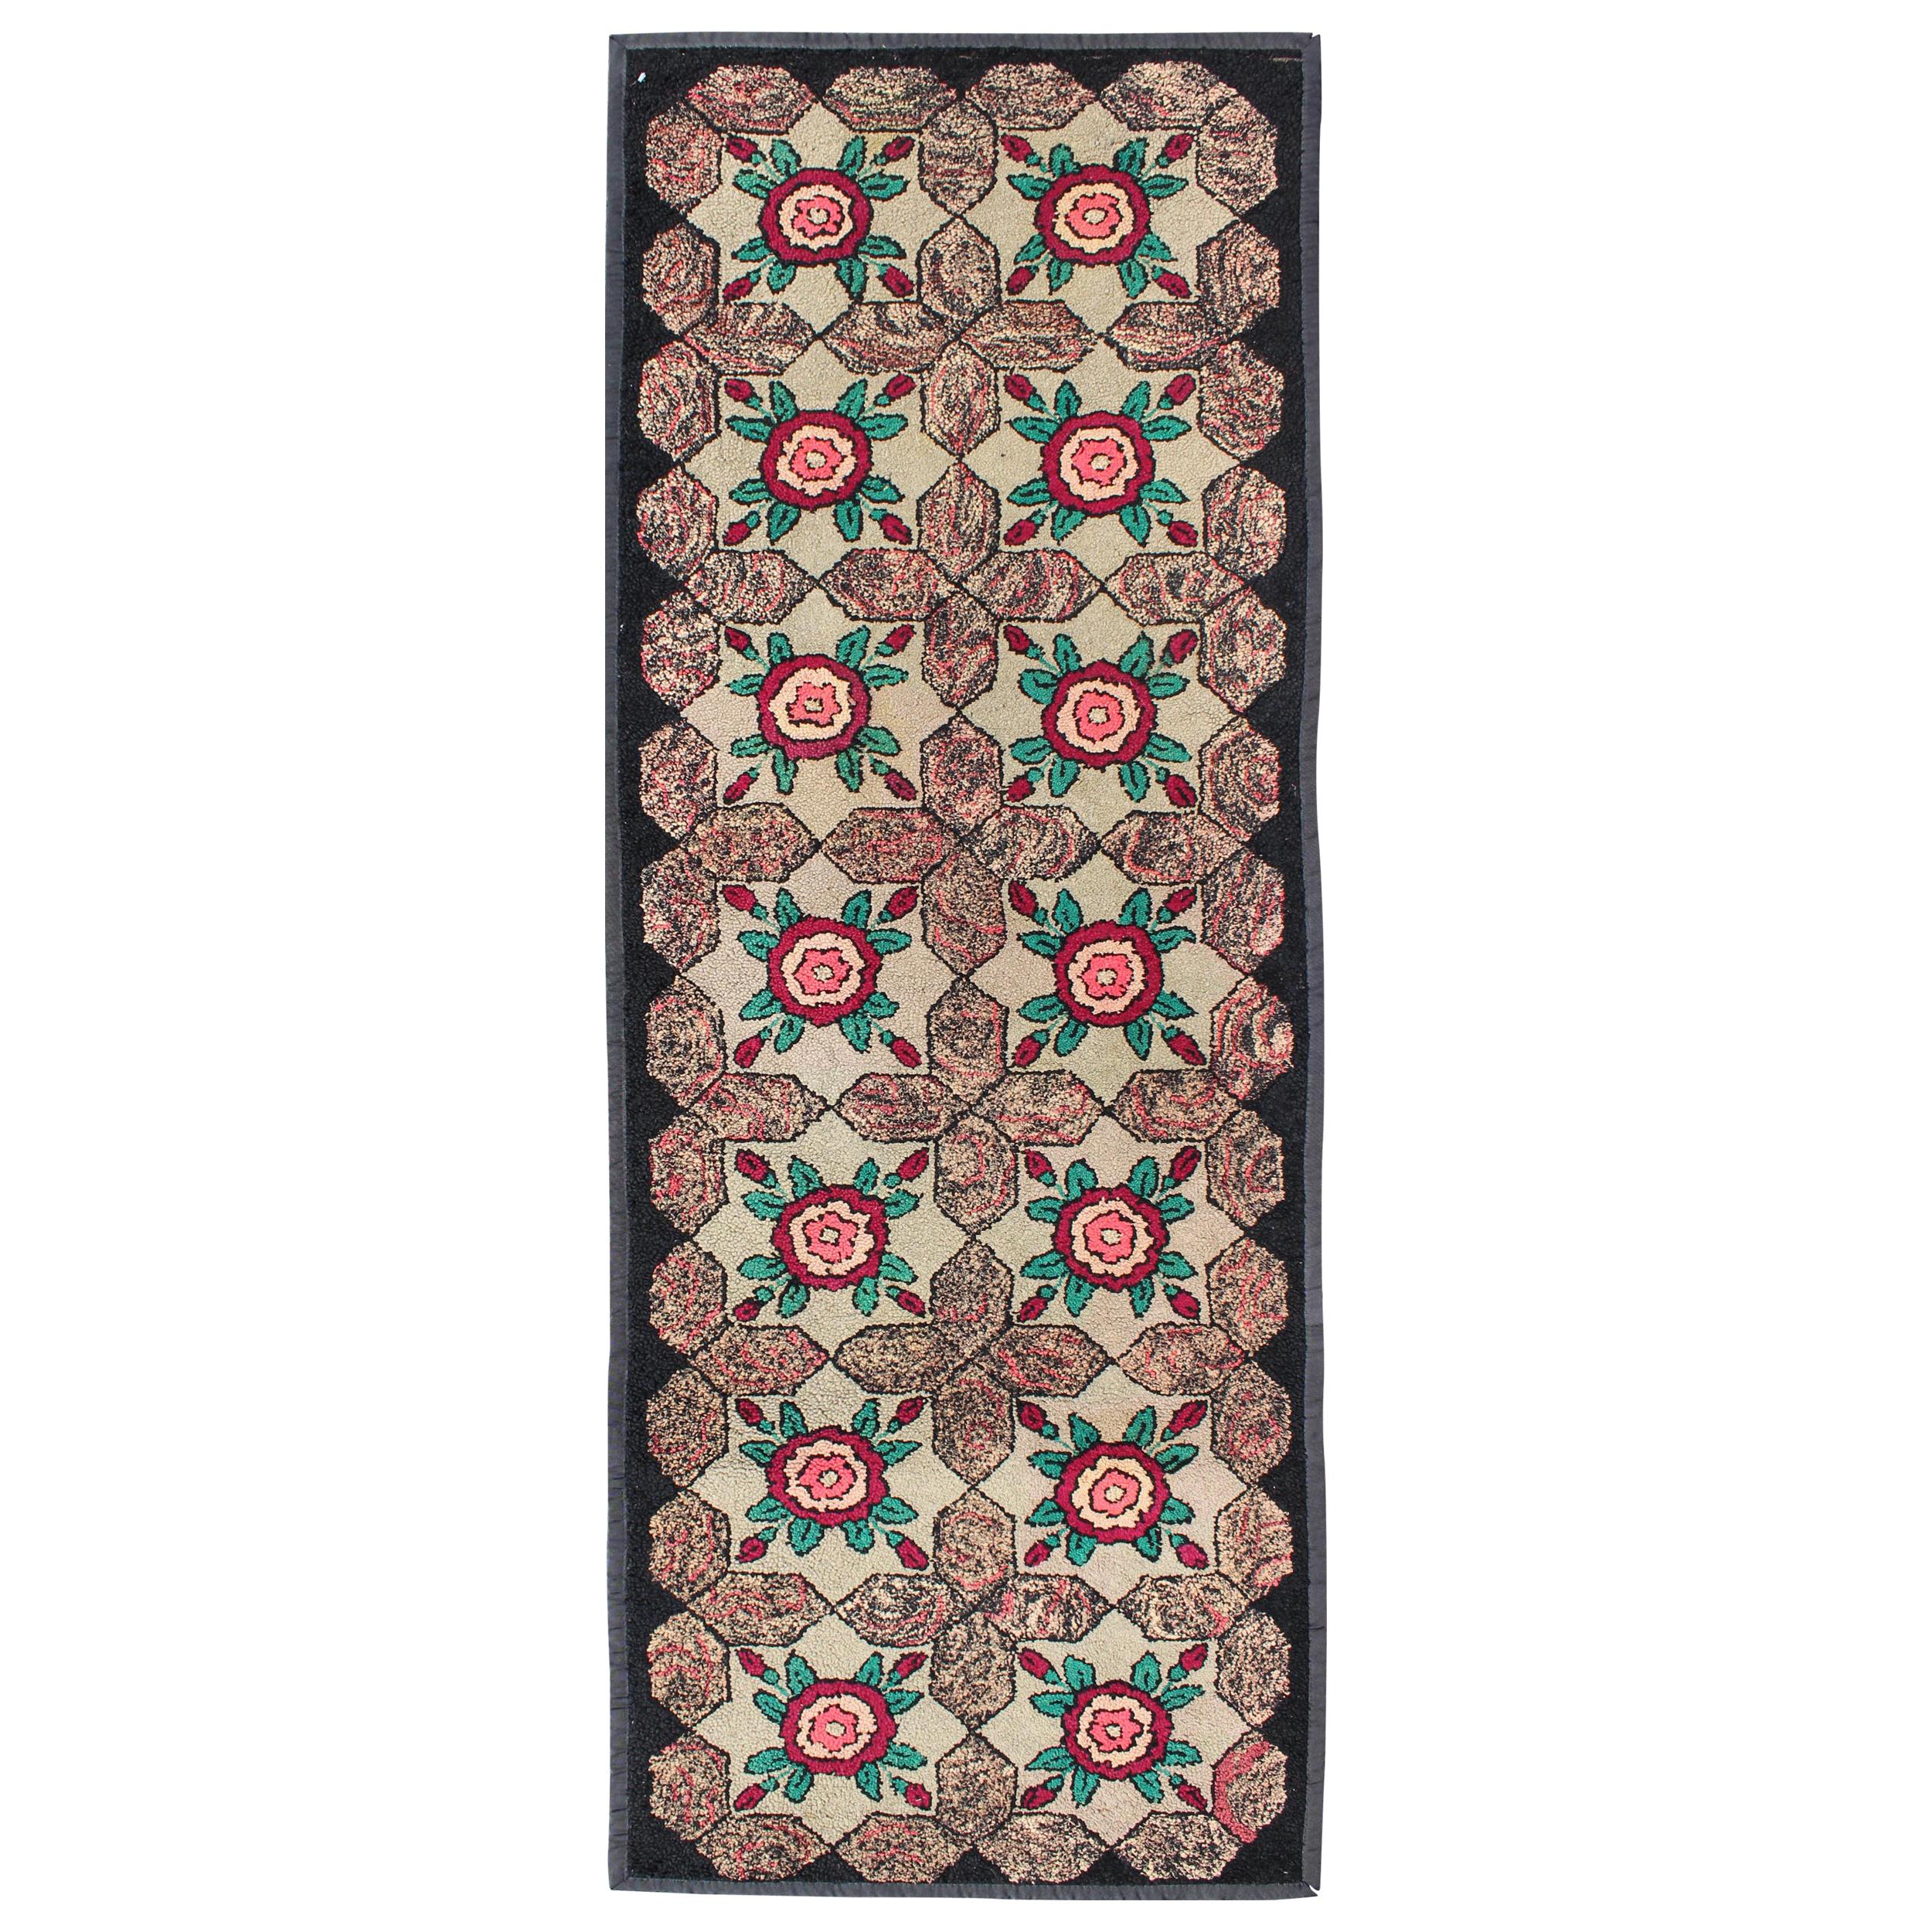 Repeating Floral-Leaf Design American Hooked Rug in Brown, Green, and Red For Sale